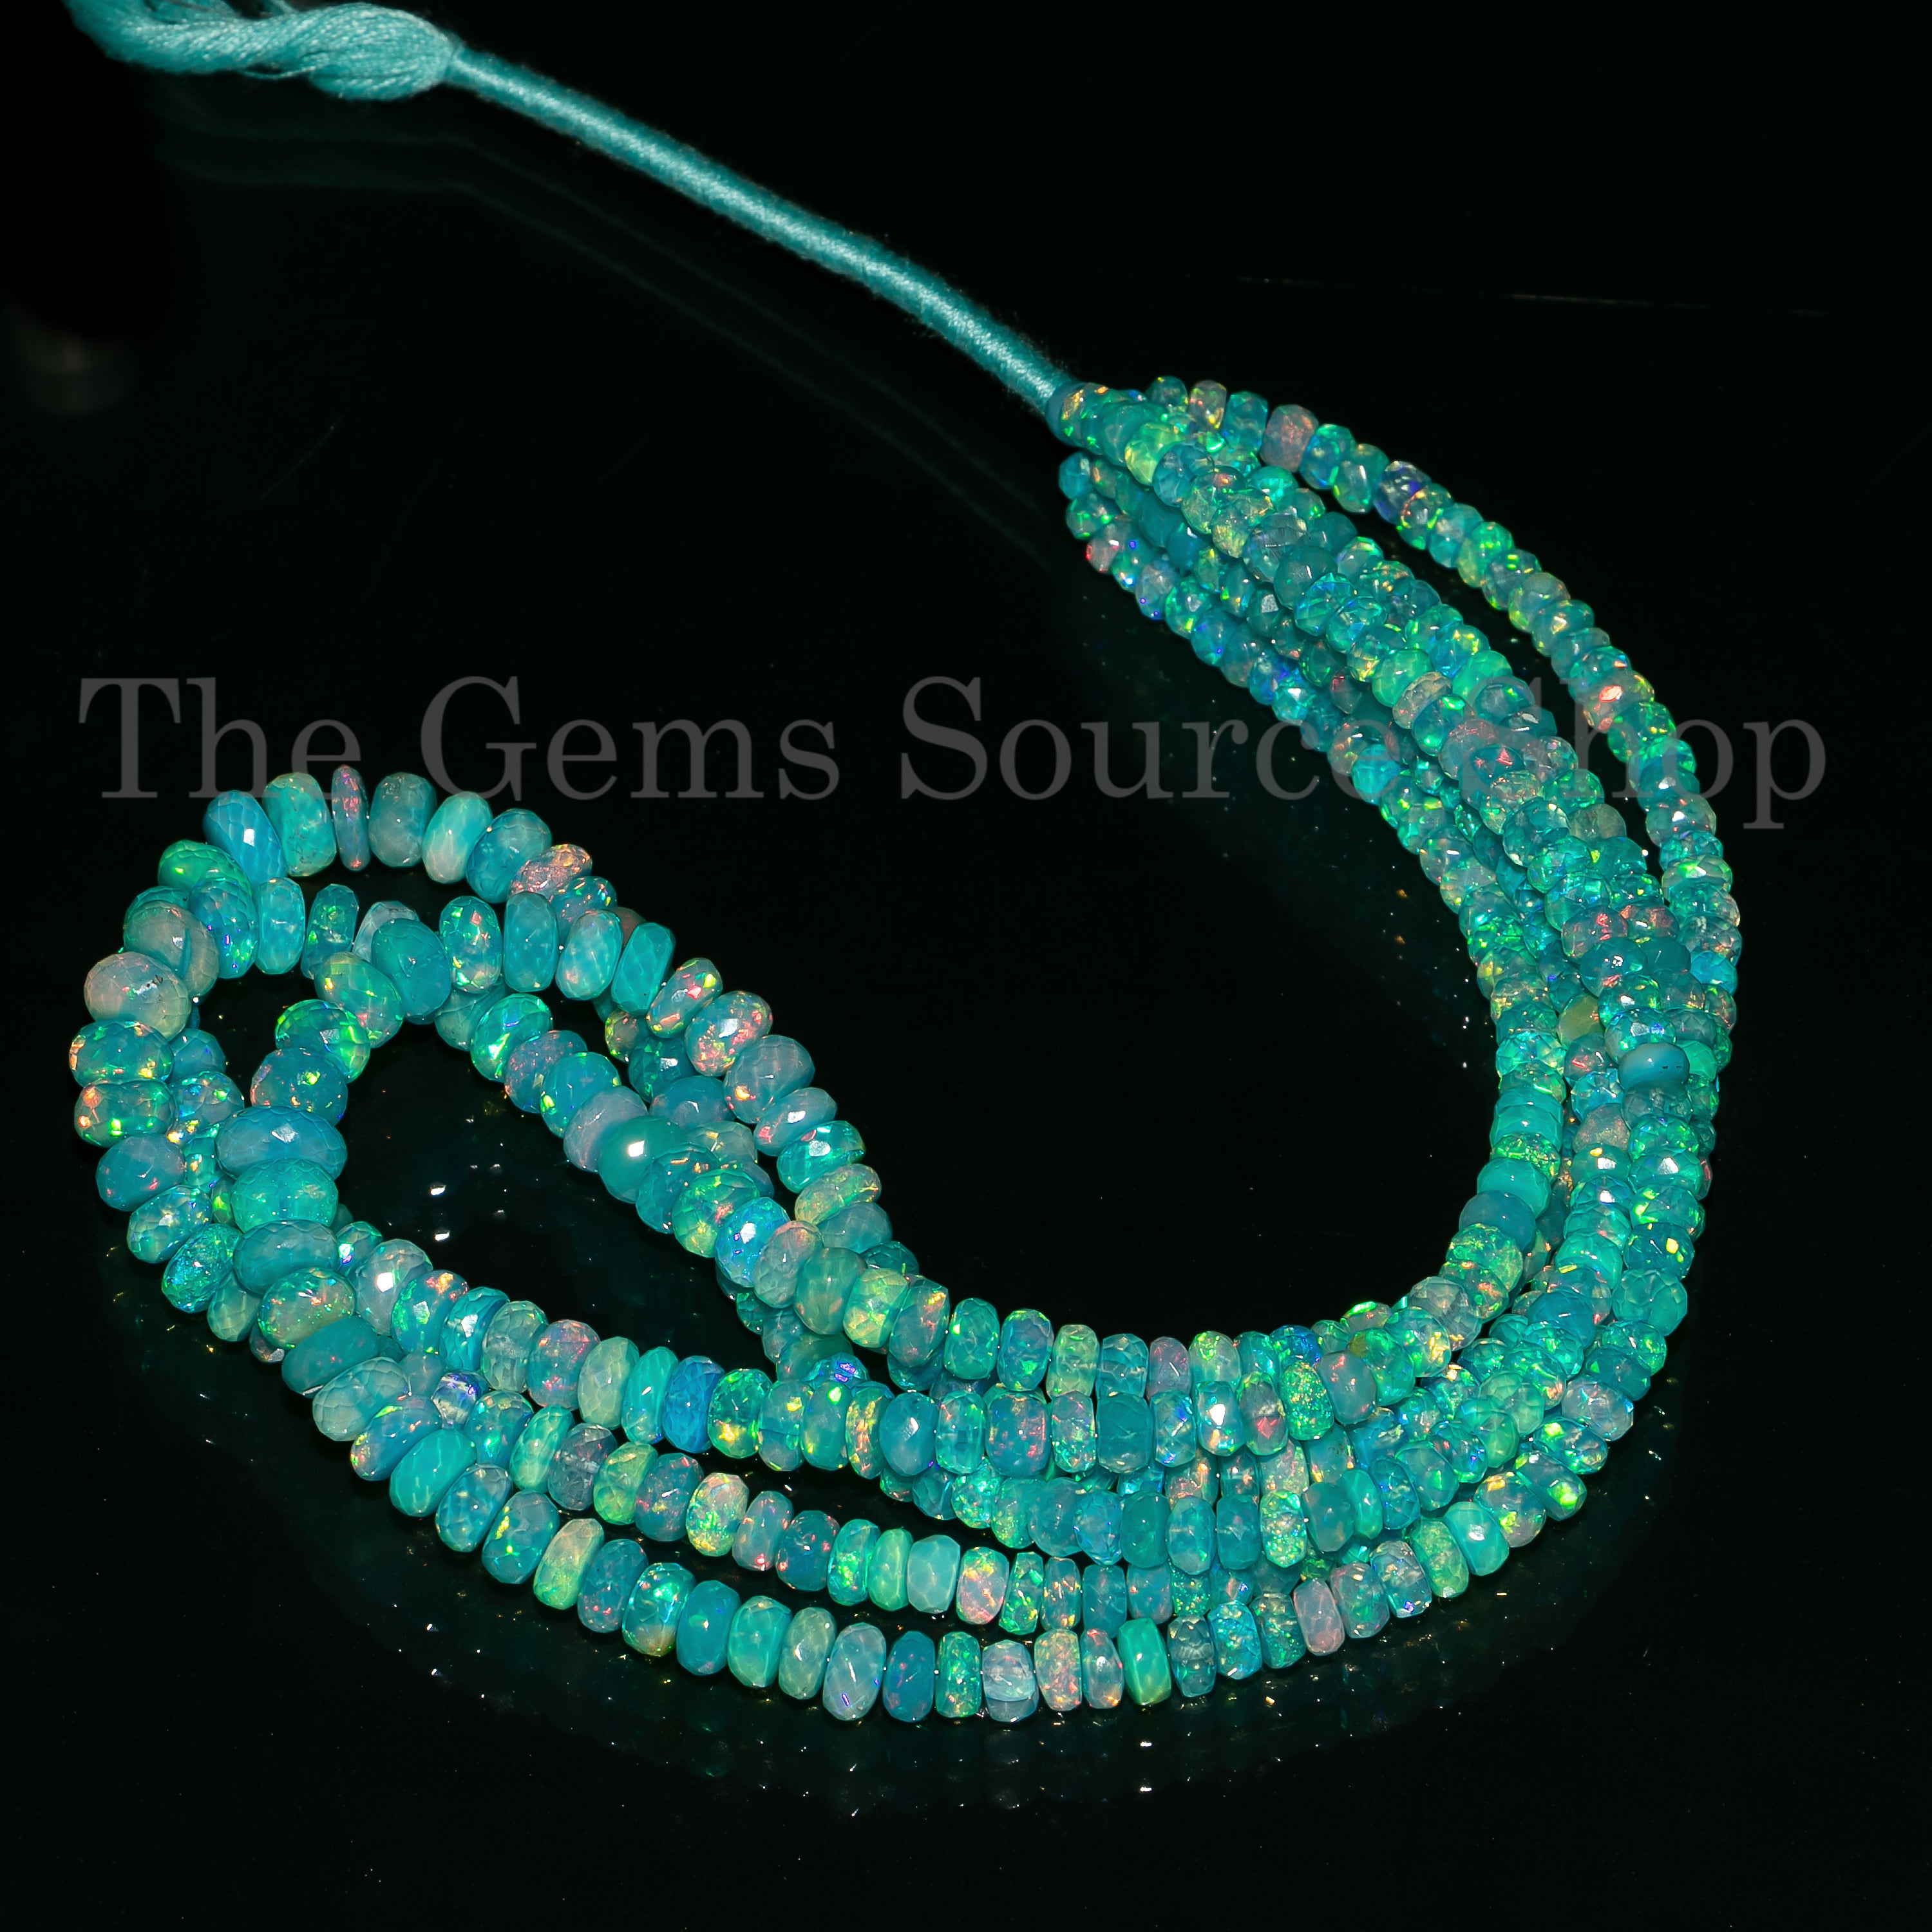 Paraiba Opal Faceted Rondelle Beads, Paraiba Opal Beads, 5-7mm Paraiba Opal Rondelle, Opal Beads, Opal Rondelle Beads, Beads For Jewelry